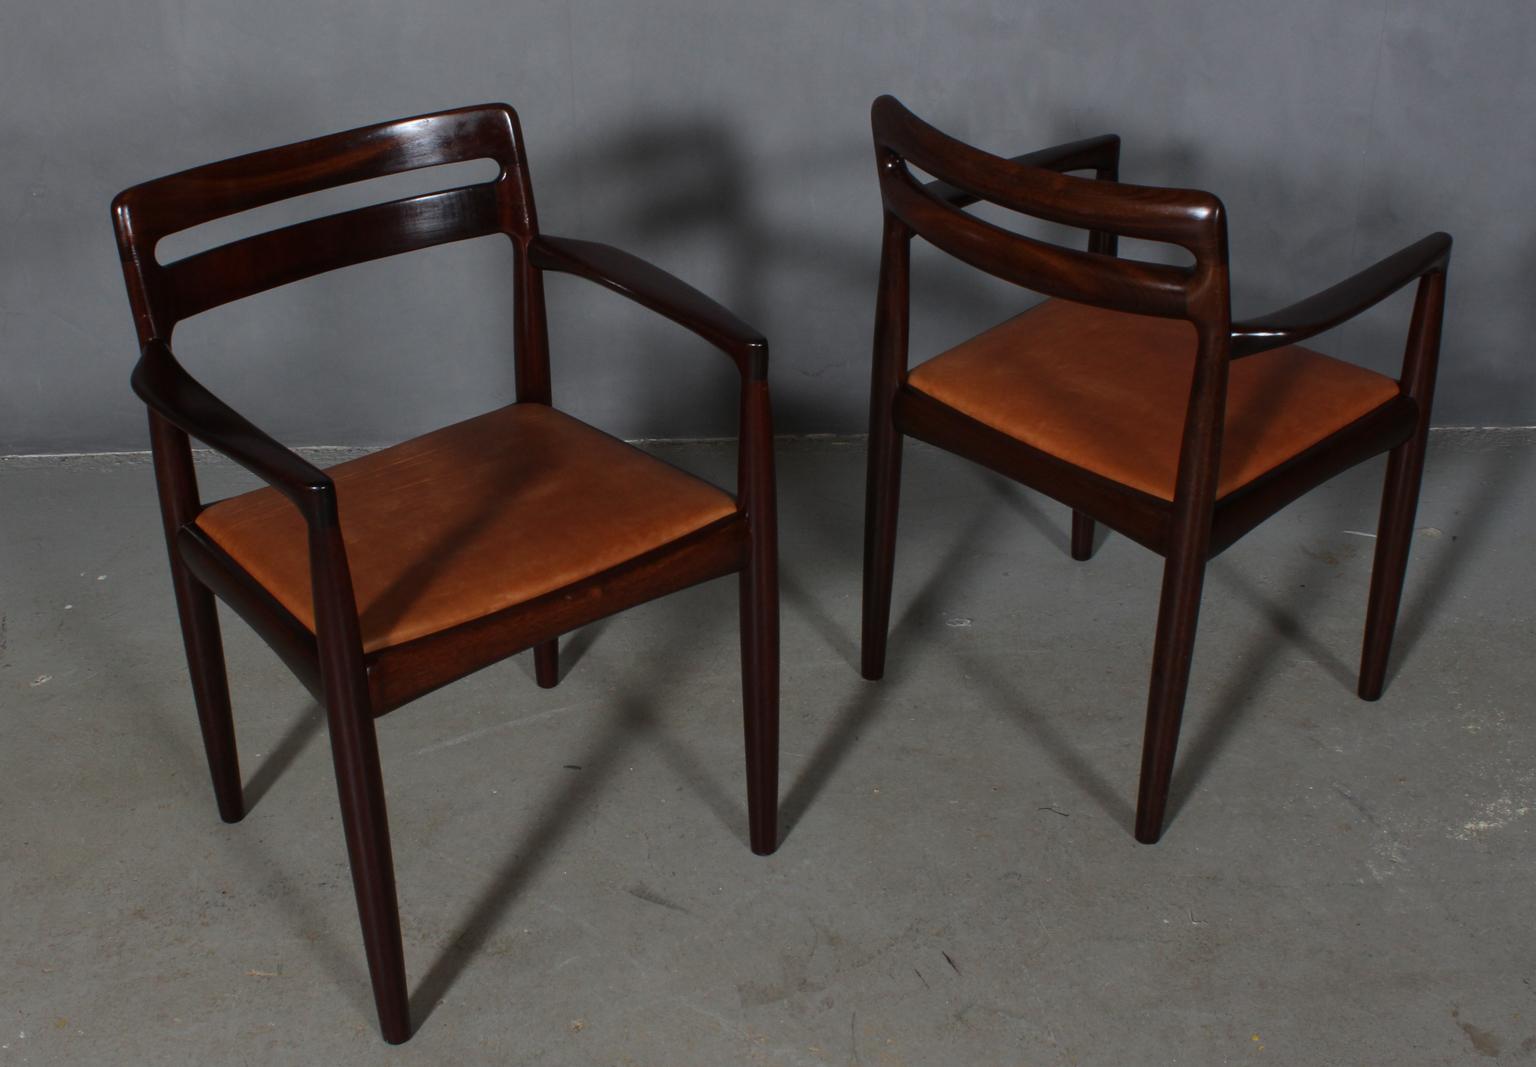 H. W. Klein set of armchairs in mahogany.

New upholstered with vintage tan aniline leather.

Made by Bramin.